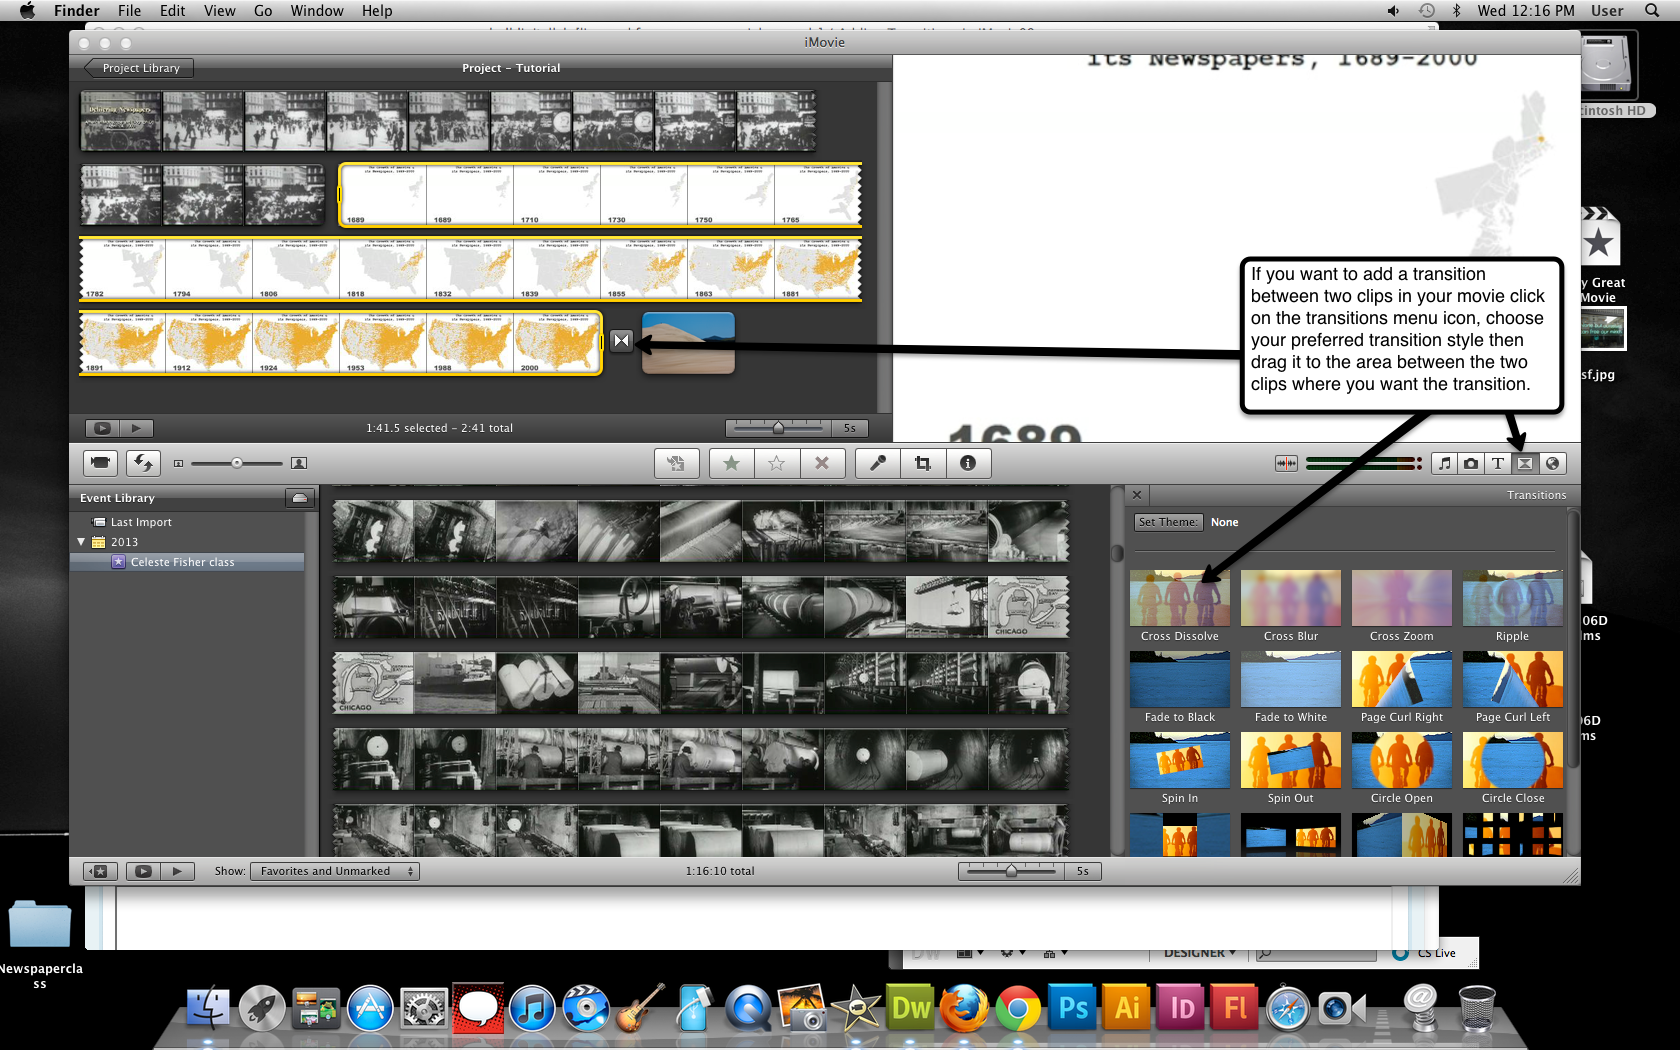 Visual guide to adding transitions in iMovie '11